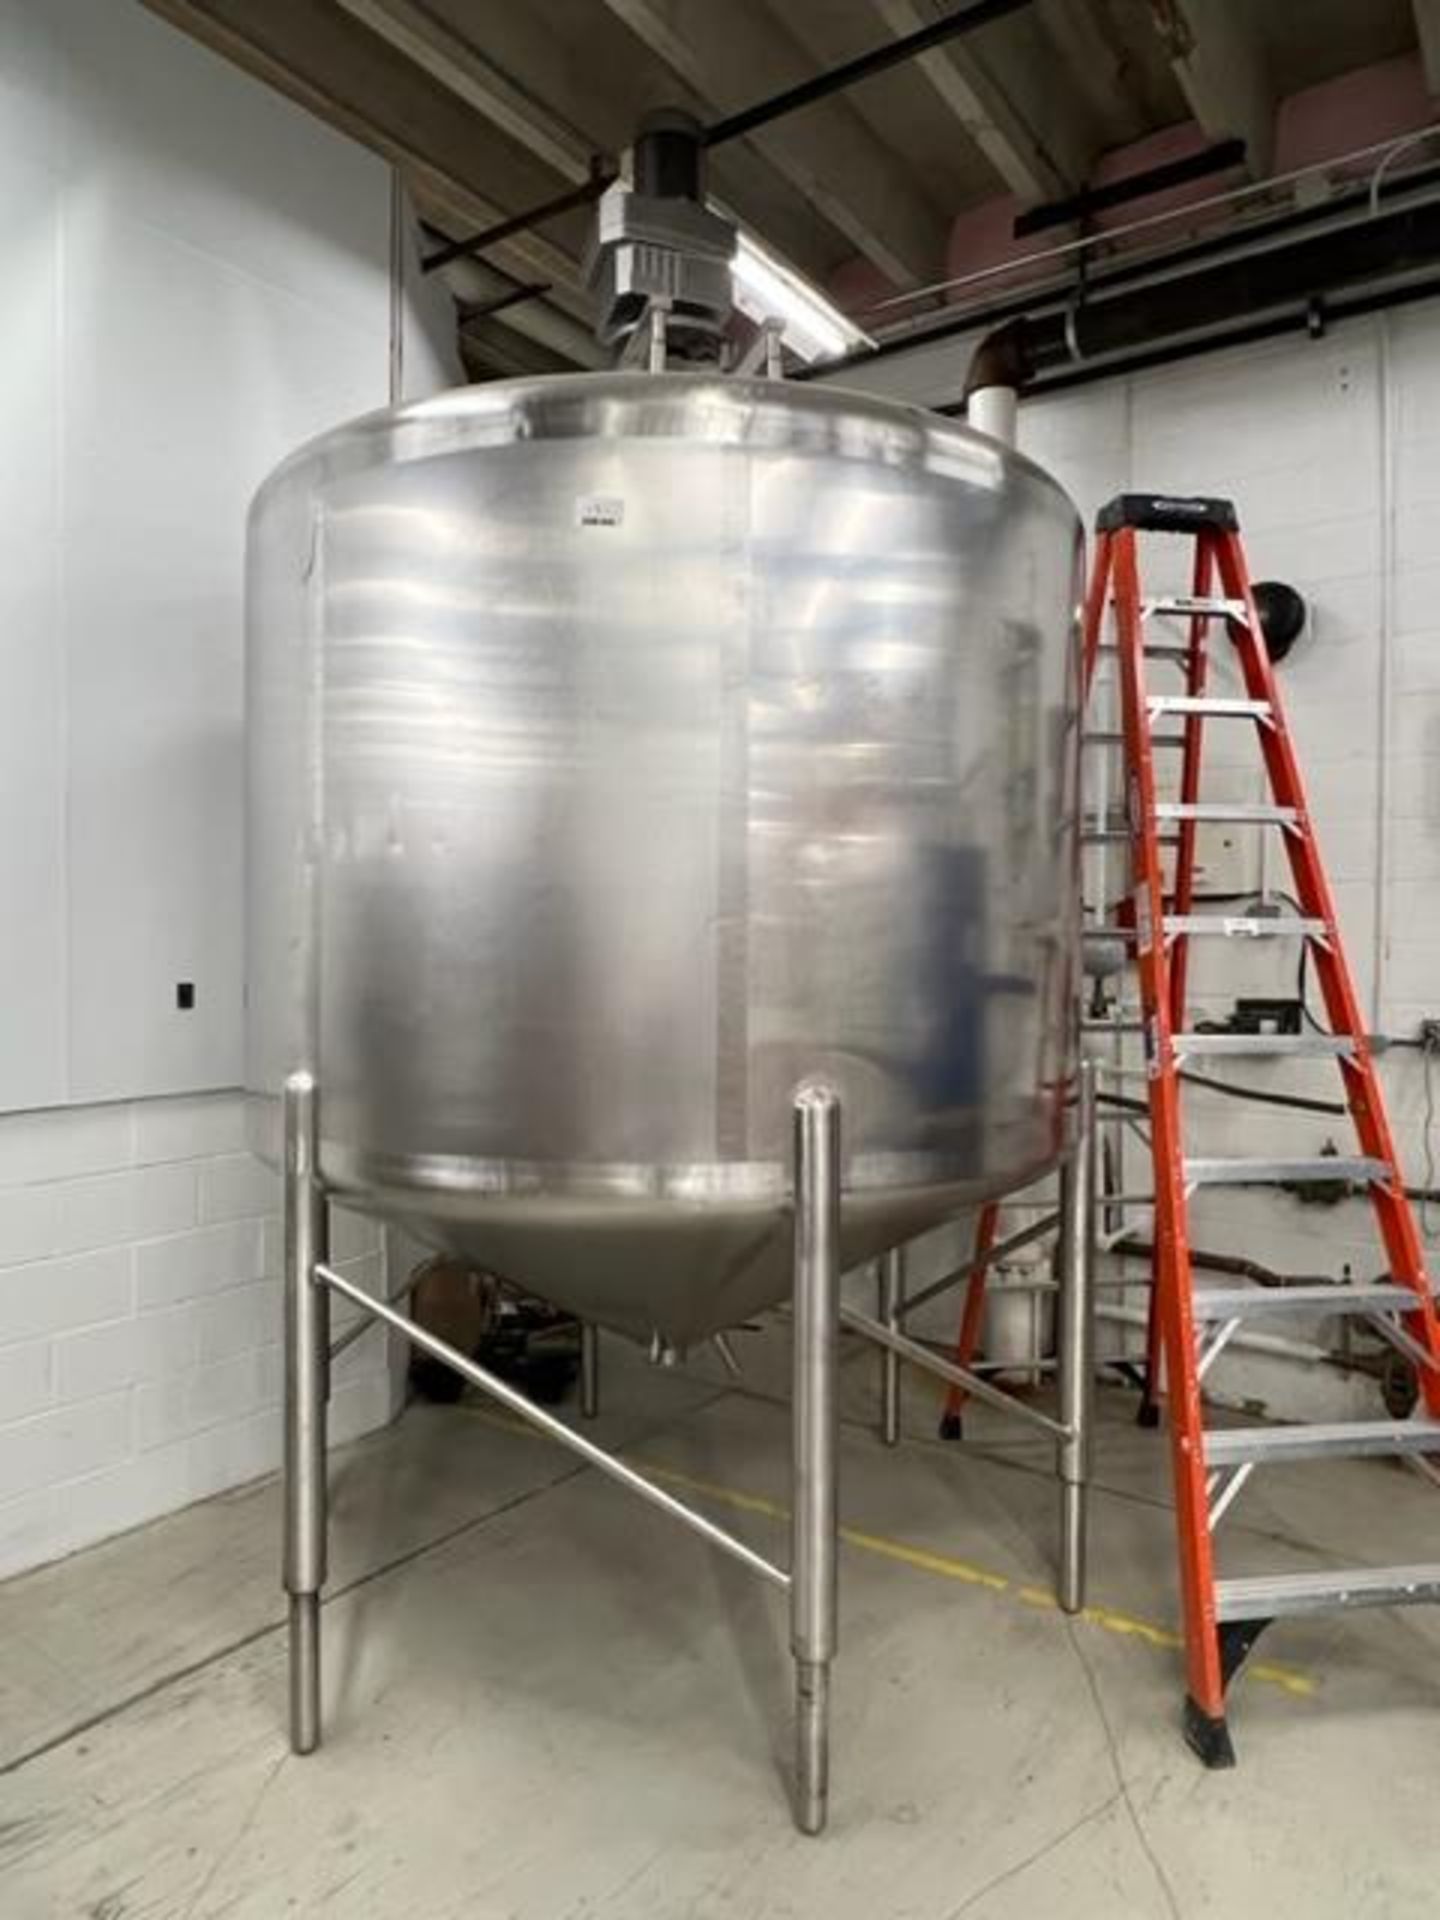 Asset 131 - Tank apprx. 1500 gallon Stainless steel with sweep agitator